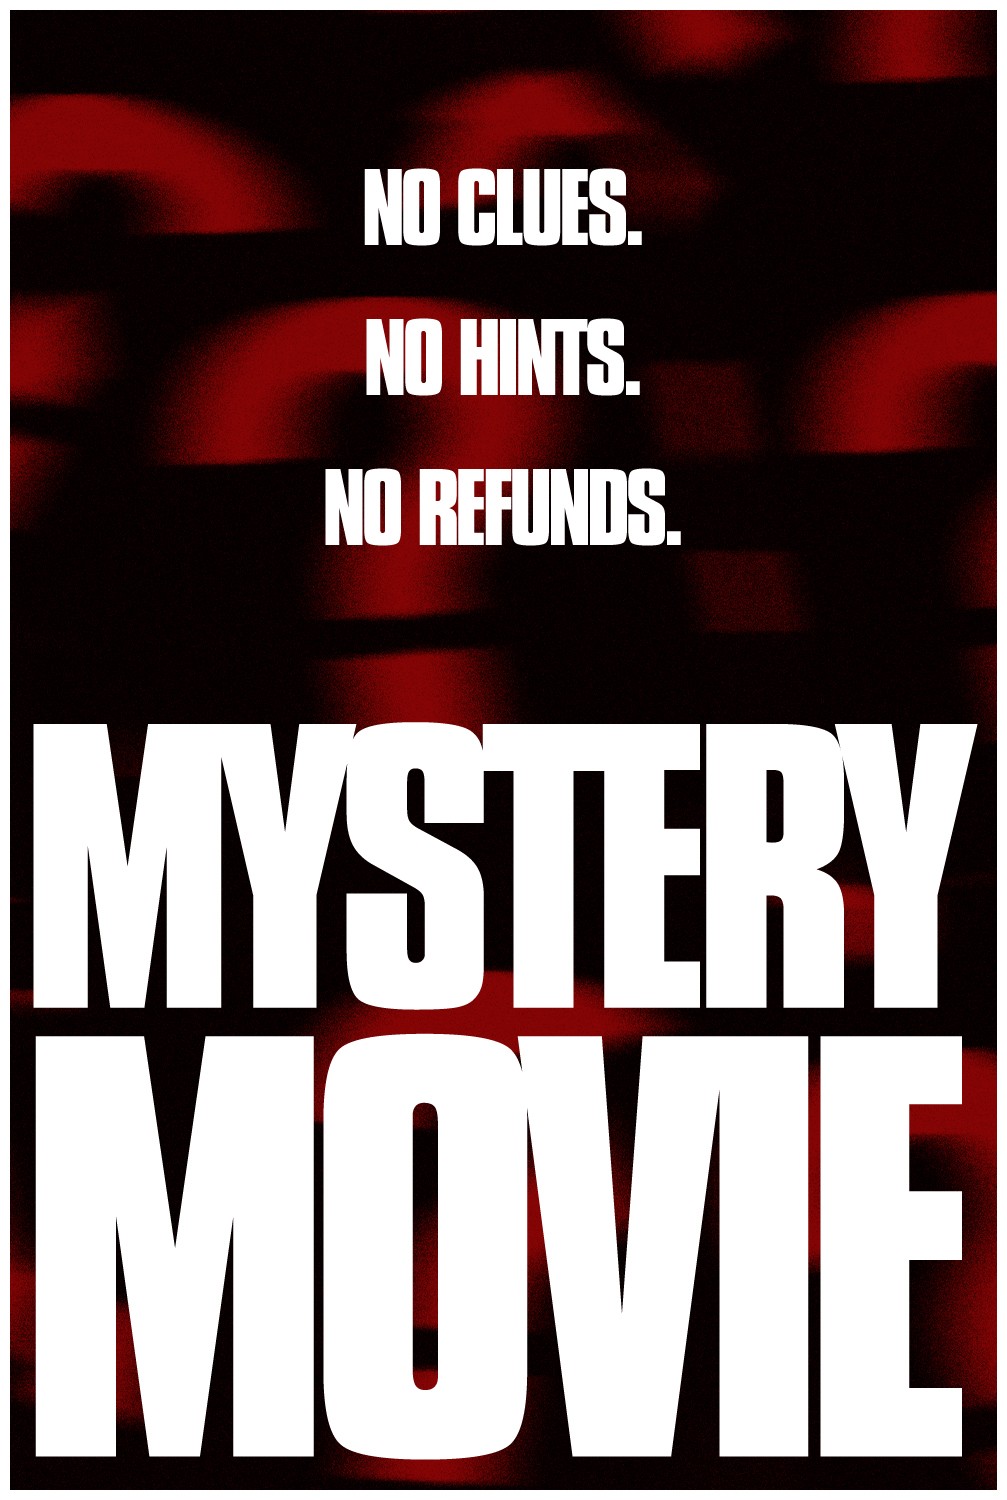 MYSTERY MOVIES - NO CLUES. NO HINTS. NO REFUNDS.